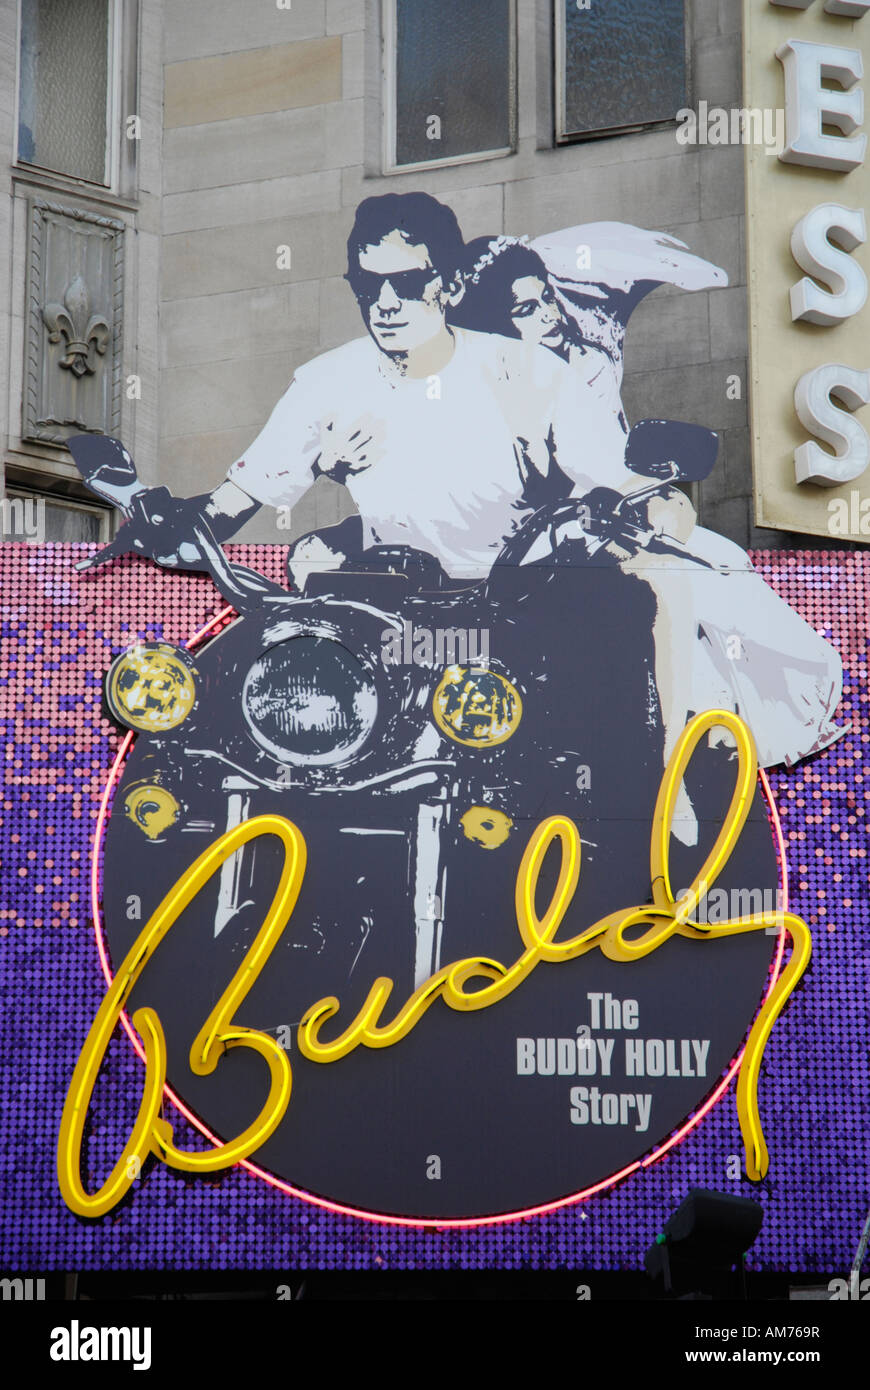 the buddy holly story poster